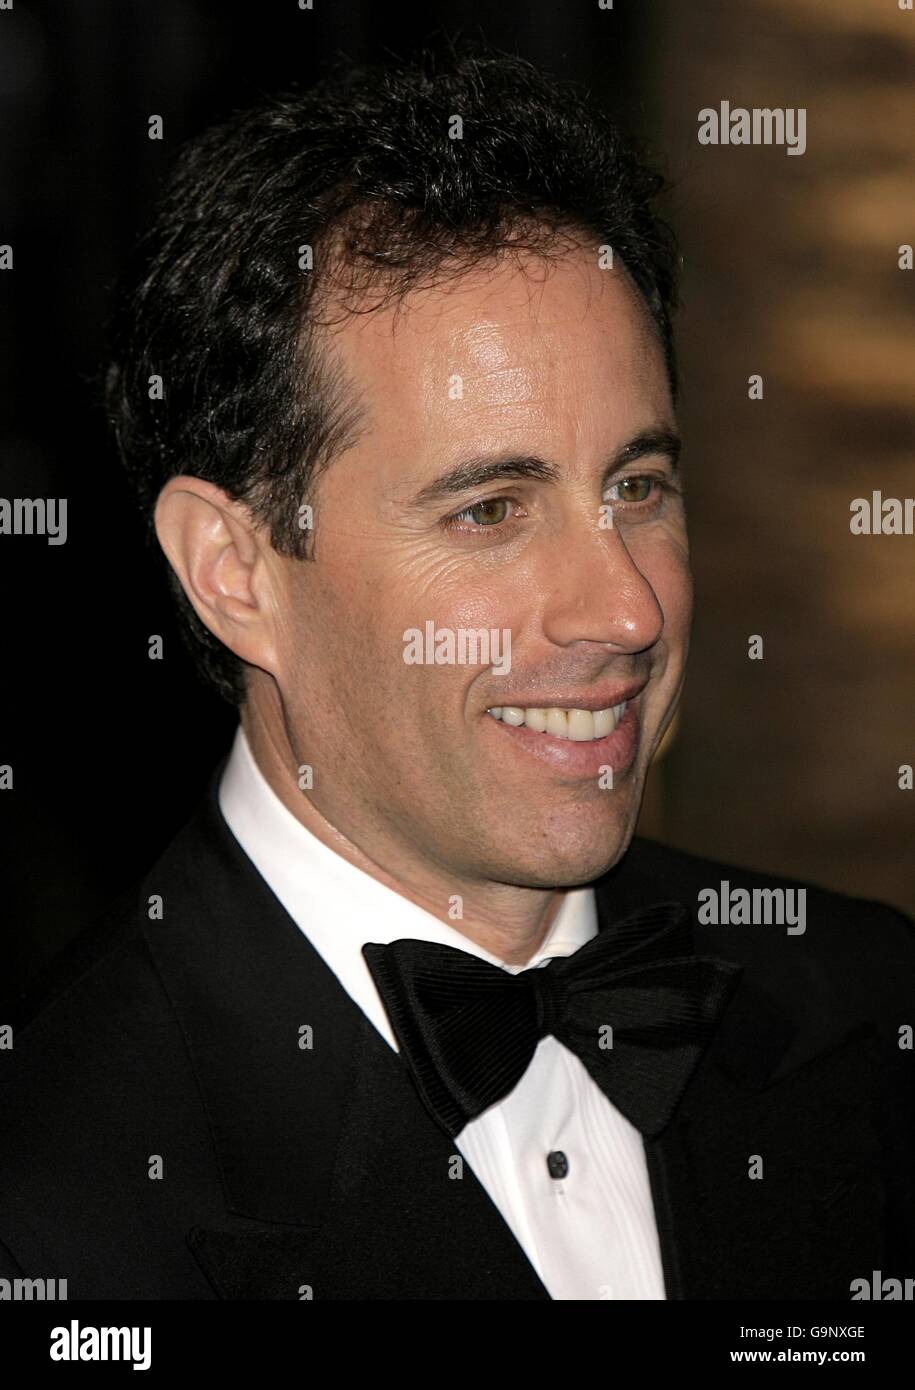 Vanity Fair Party - Los Angeles. Jerry Seinfeld arrives for the annual Vanity Fair Party at Mortons Restaurant, Los Angeles. Stock Photo